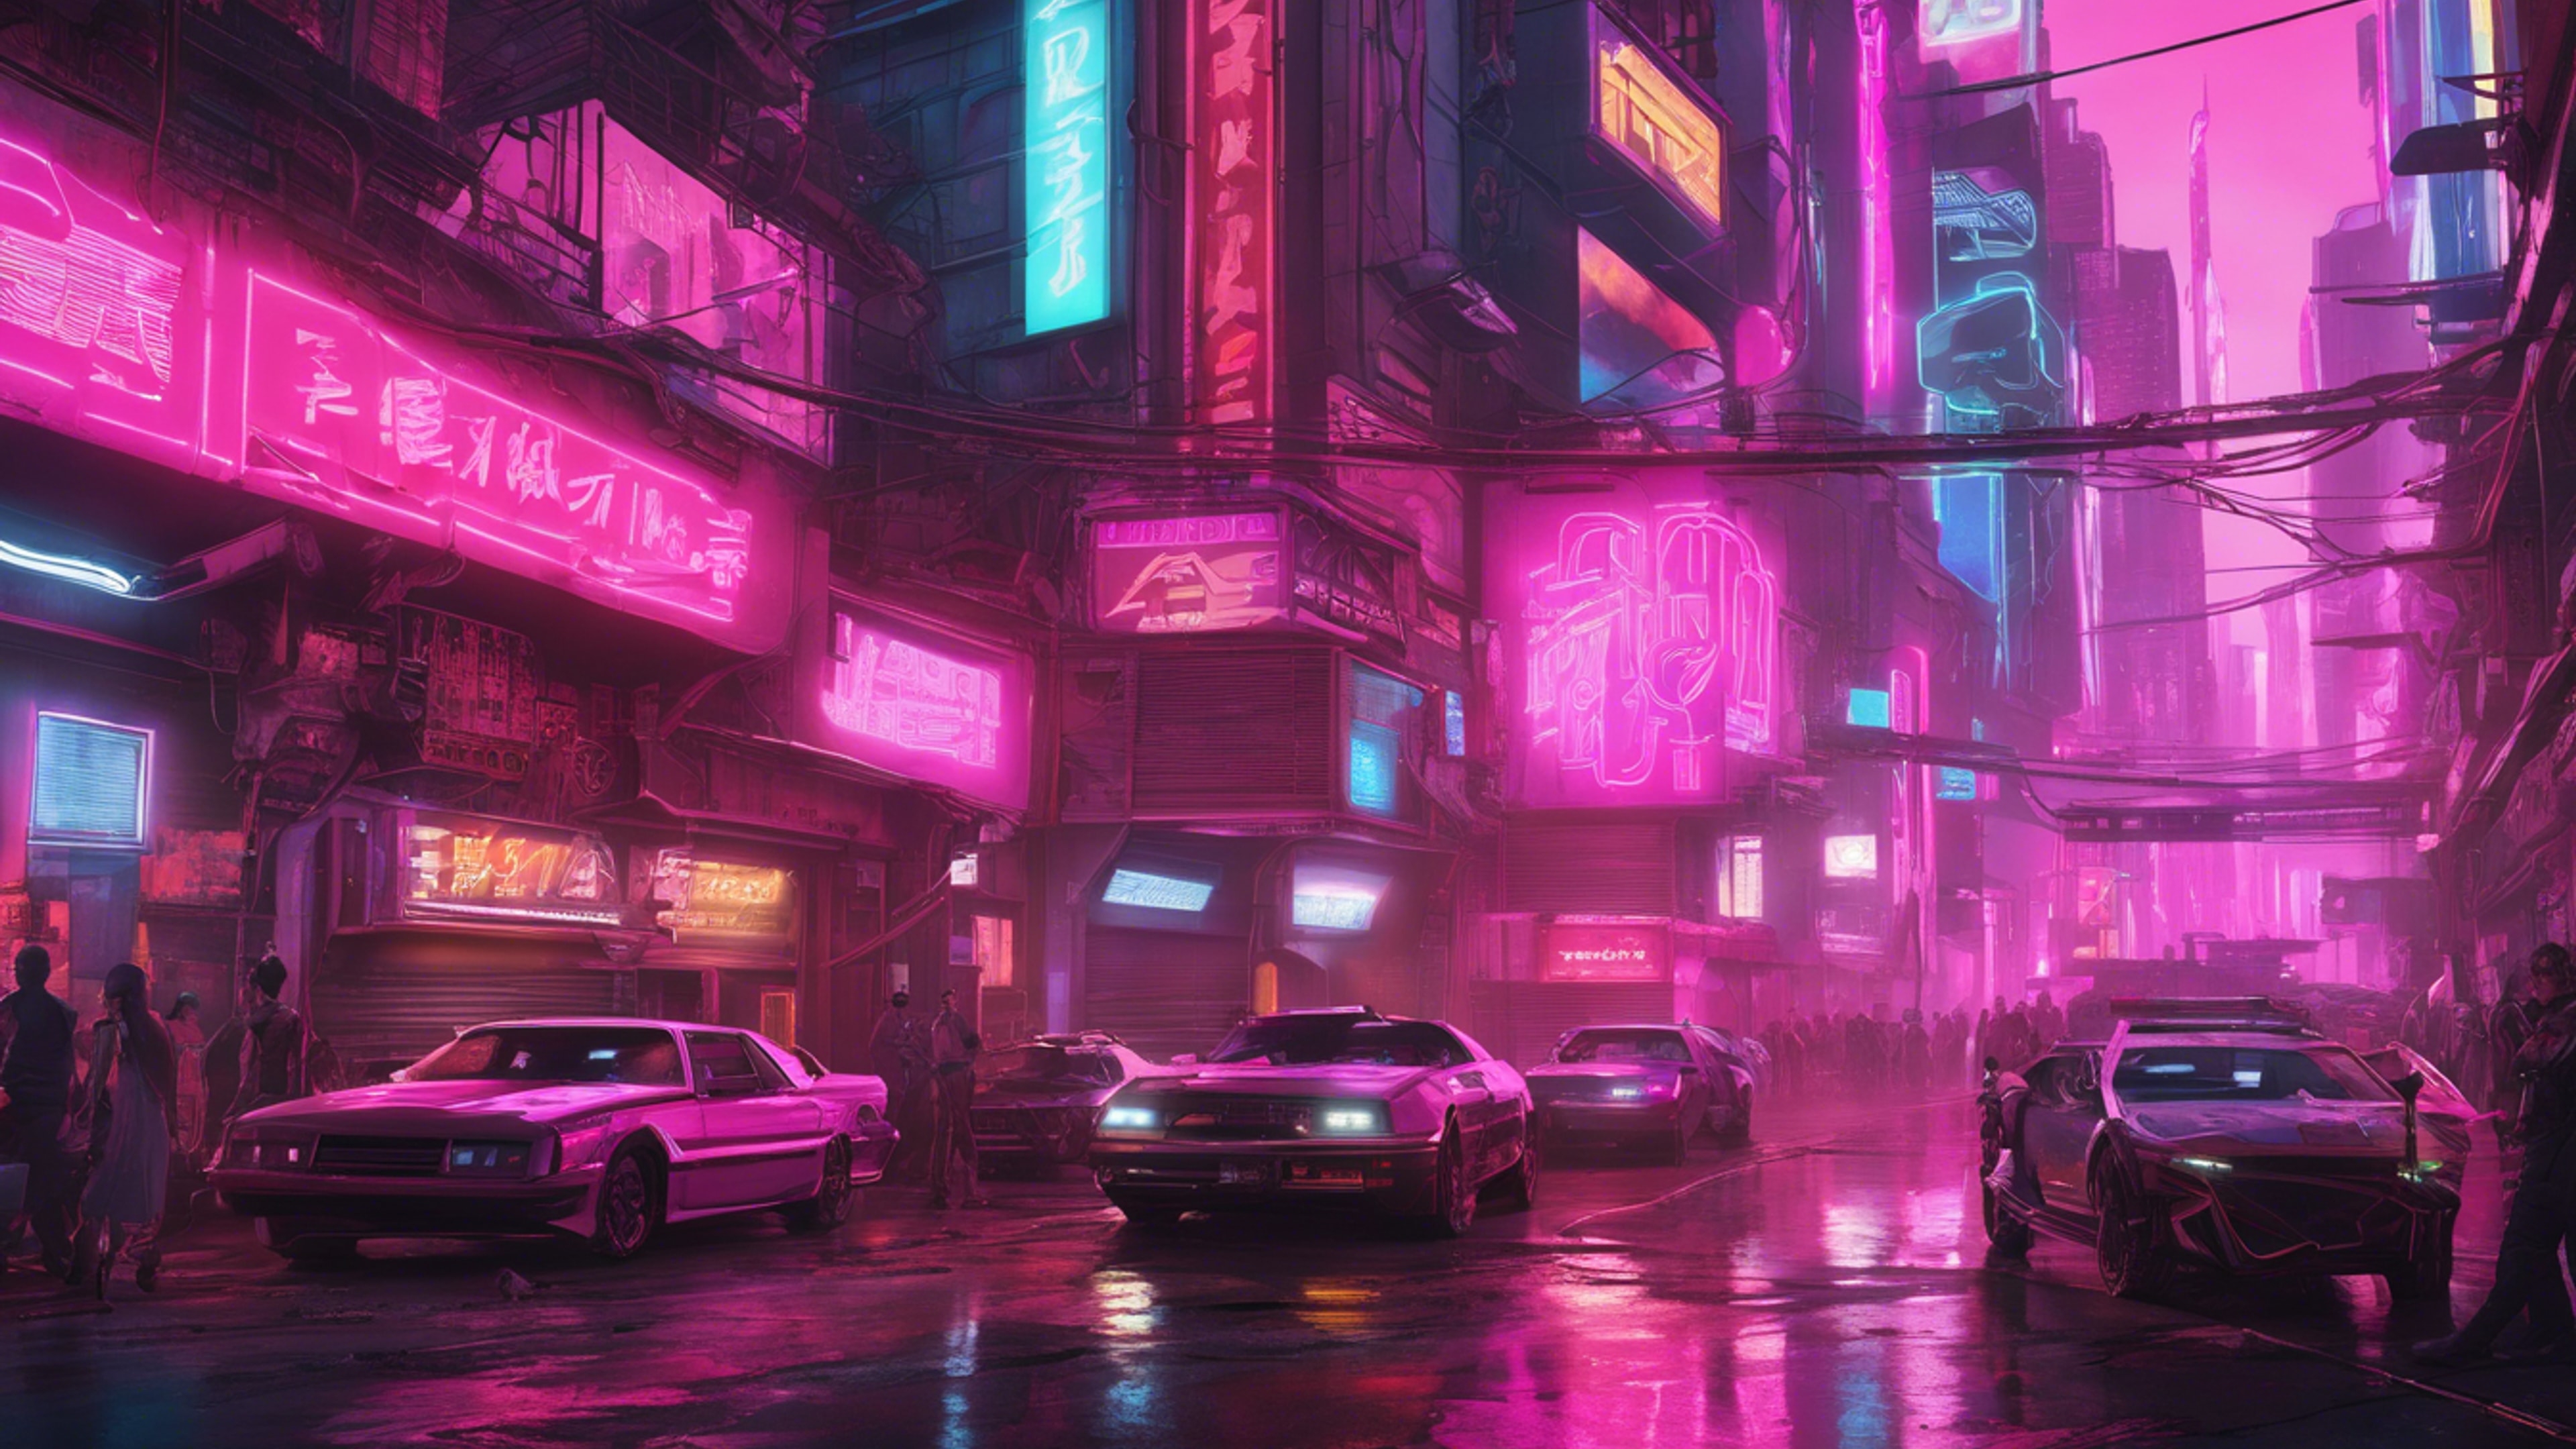 A wide-angle view of a bustling city street in the future, dominated by pink neon signs. Тапет[5759e15553a14a8aa13a]